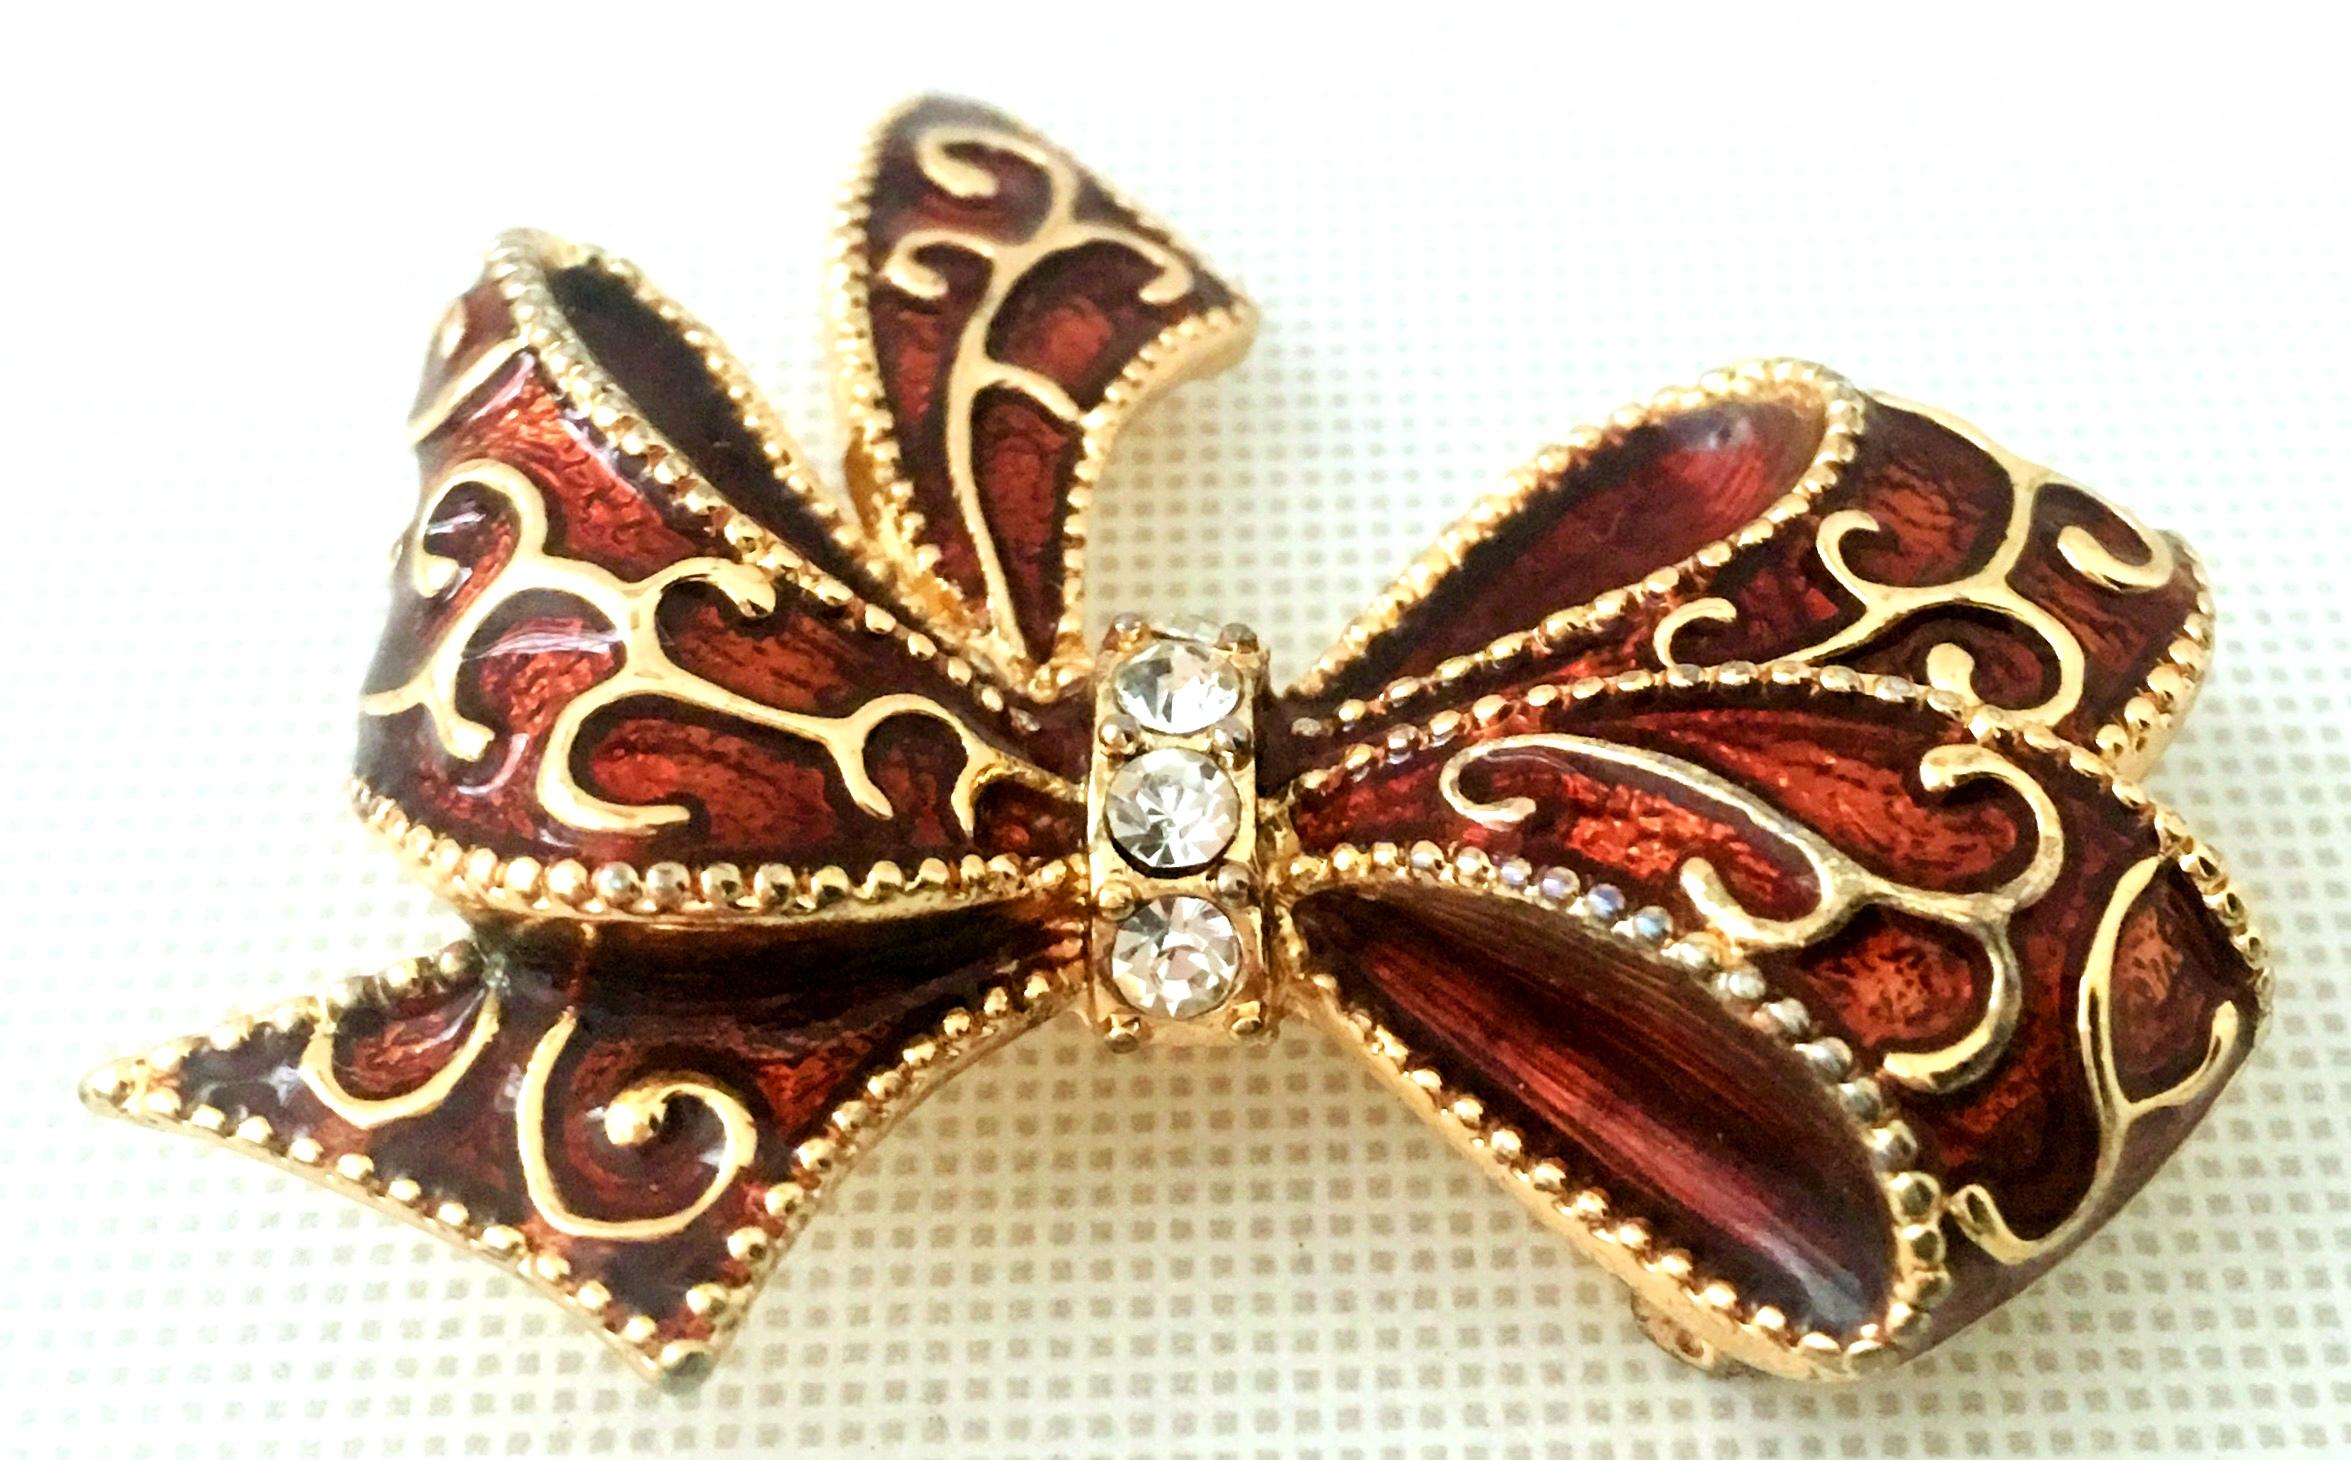  20th Century Monet Gold Enamel & Crystal Dimensional Holiday Bow Brooch  In Good Condition For Sale In West Palm Beach, FL